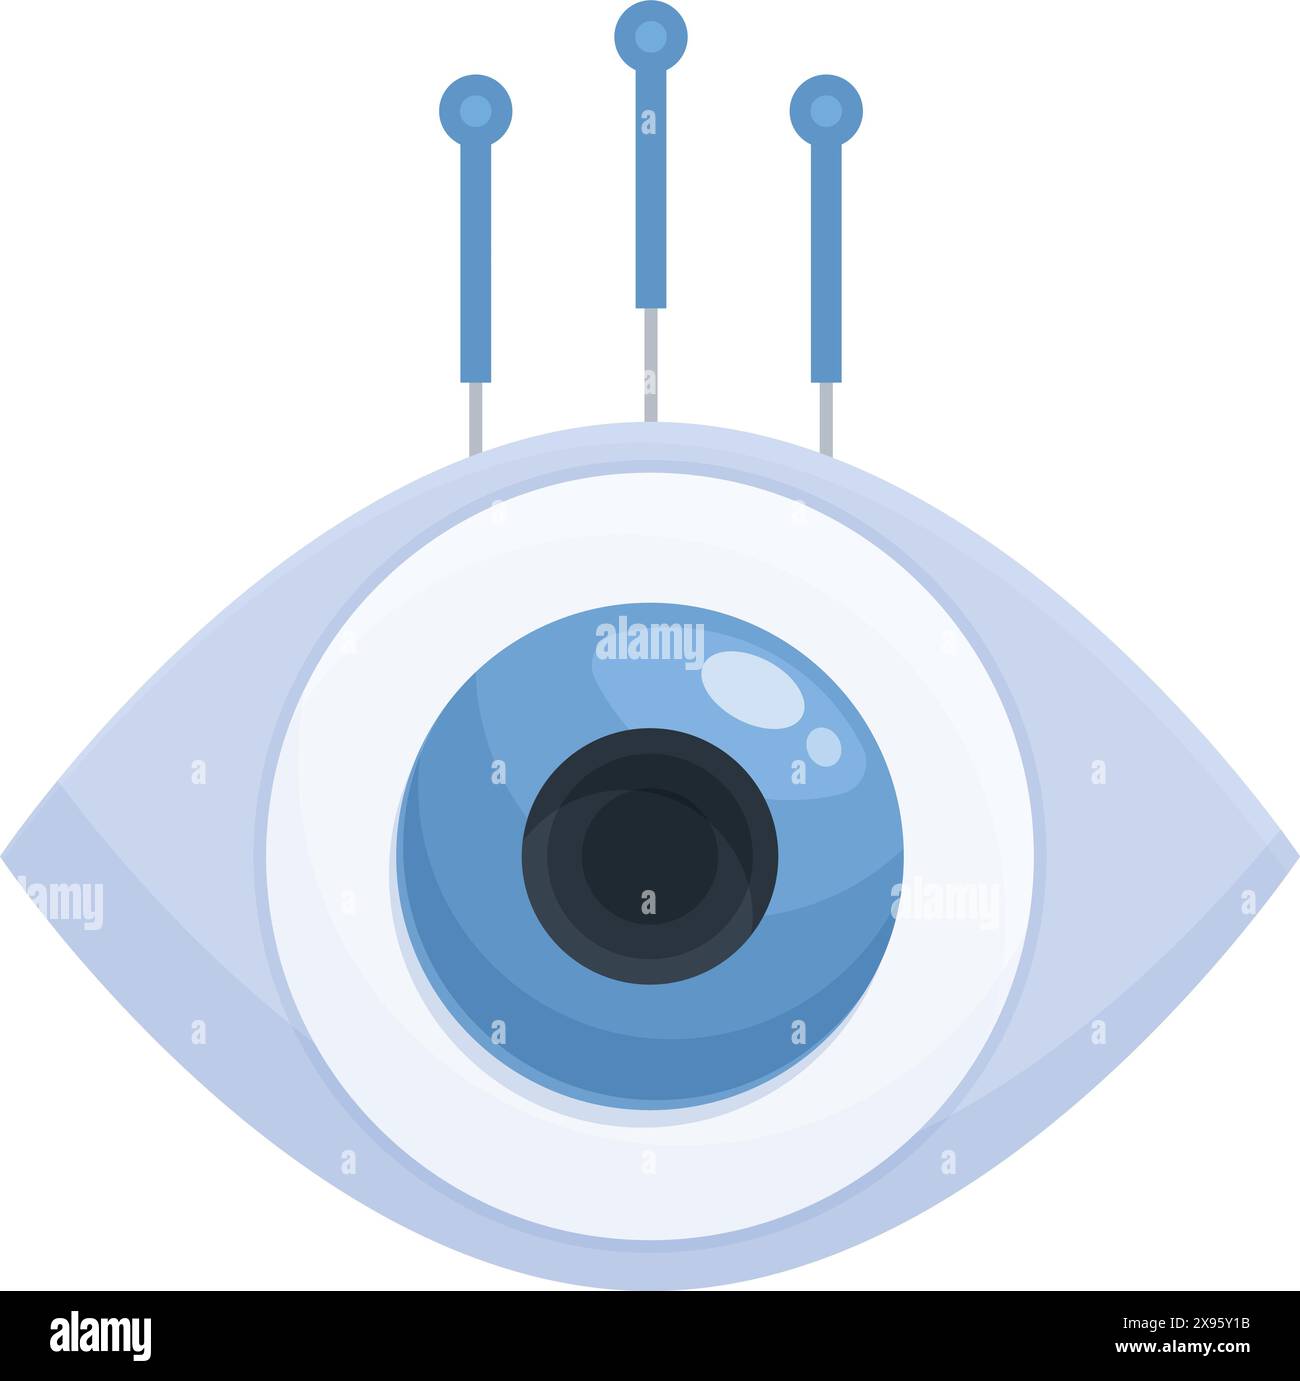 Futuristic digital eye surveillance technology illustration with abstract cyber data protection concept and artificial intelligence vision in blue vector graphic design for online monitoring and priva Stock Vector